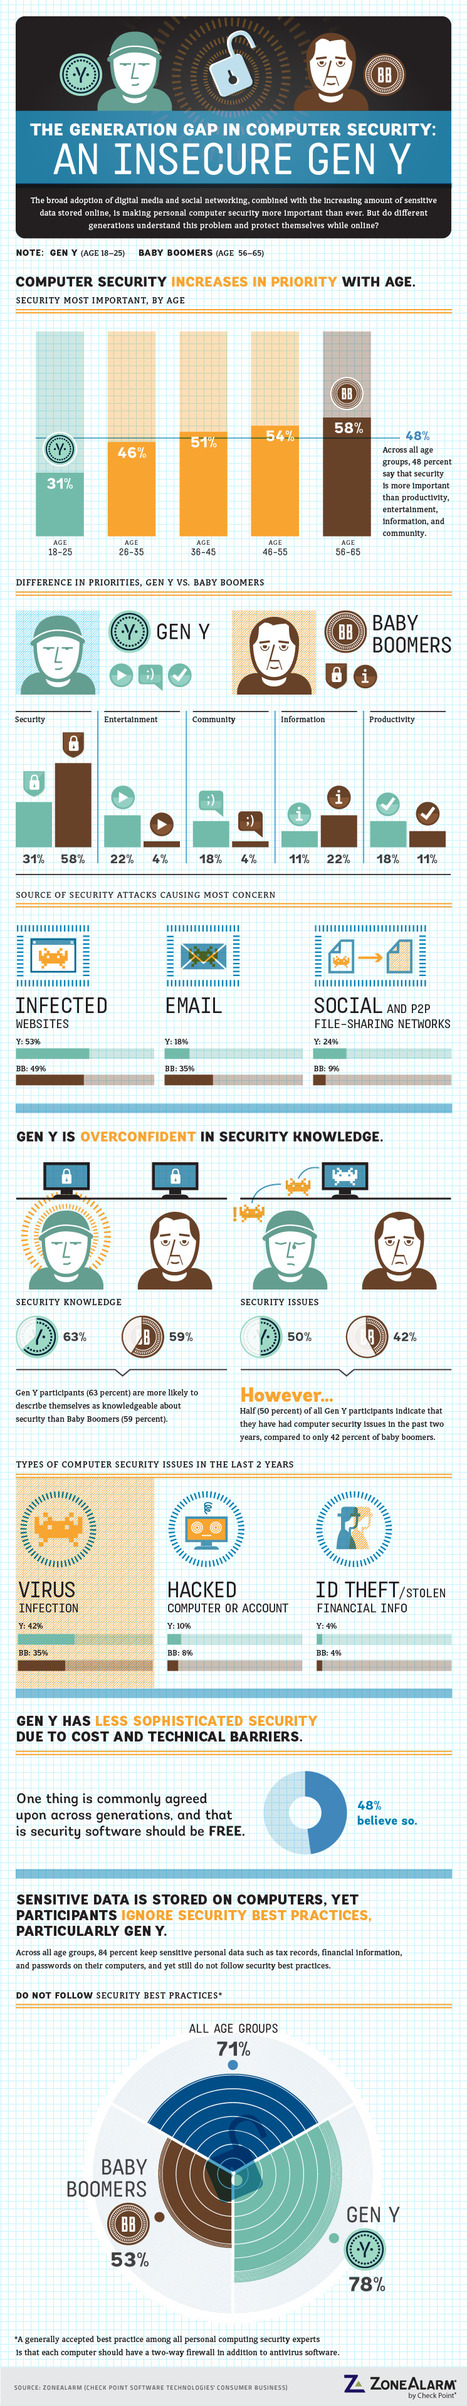 Infographic: Generation gap in computer security | 21st Century Learning and Teaching | Scoop.it